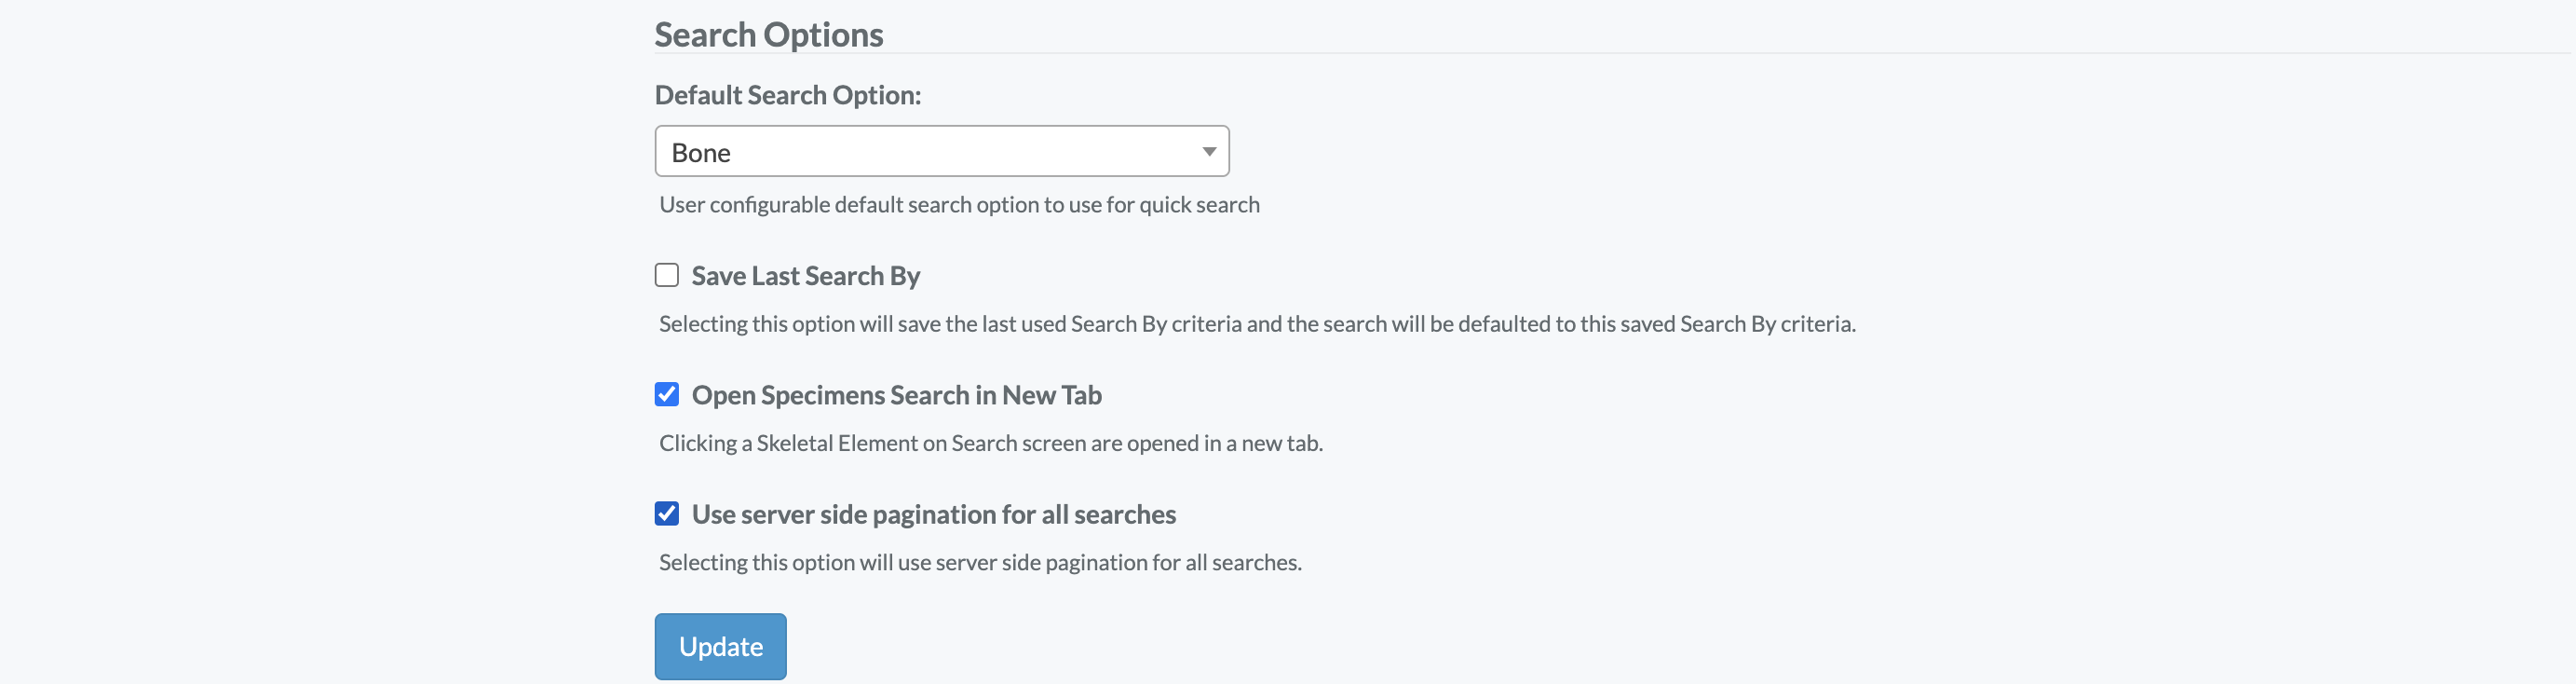 Search Option View